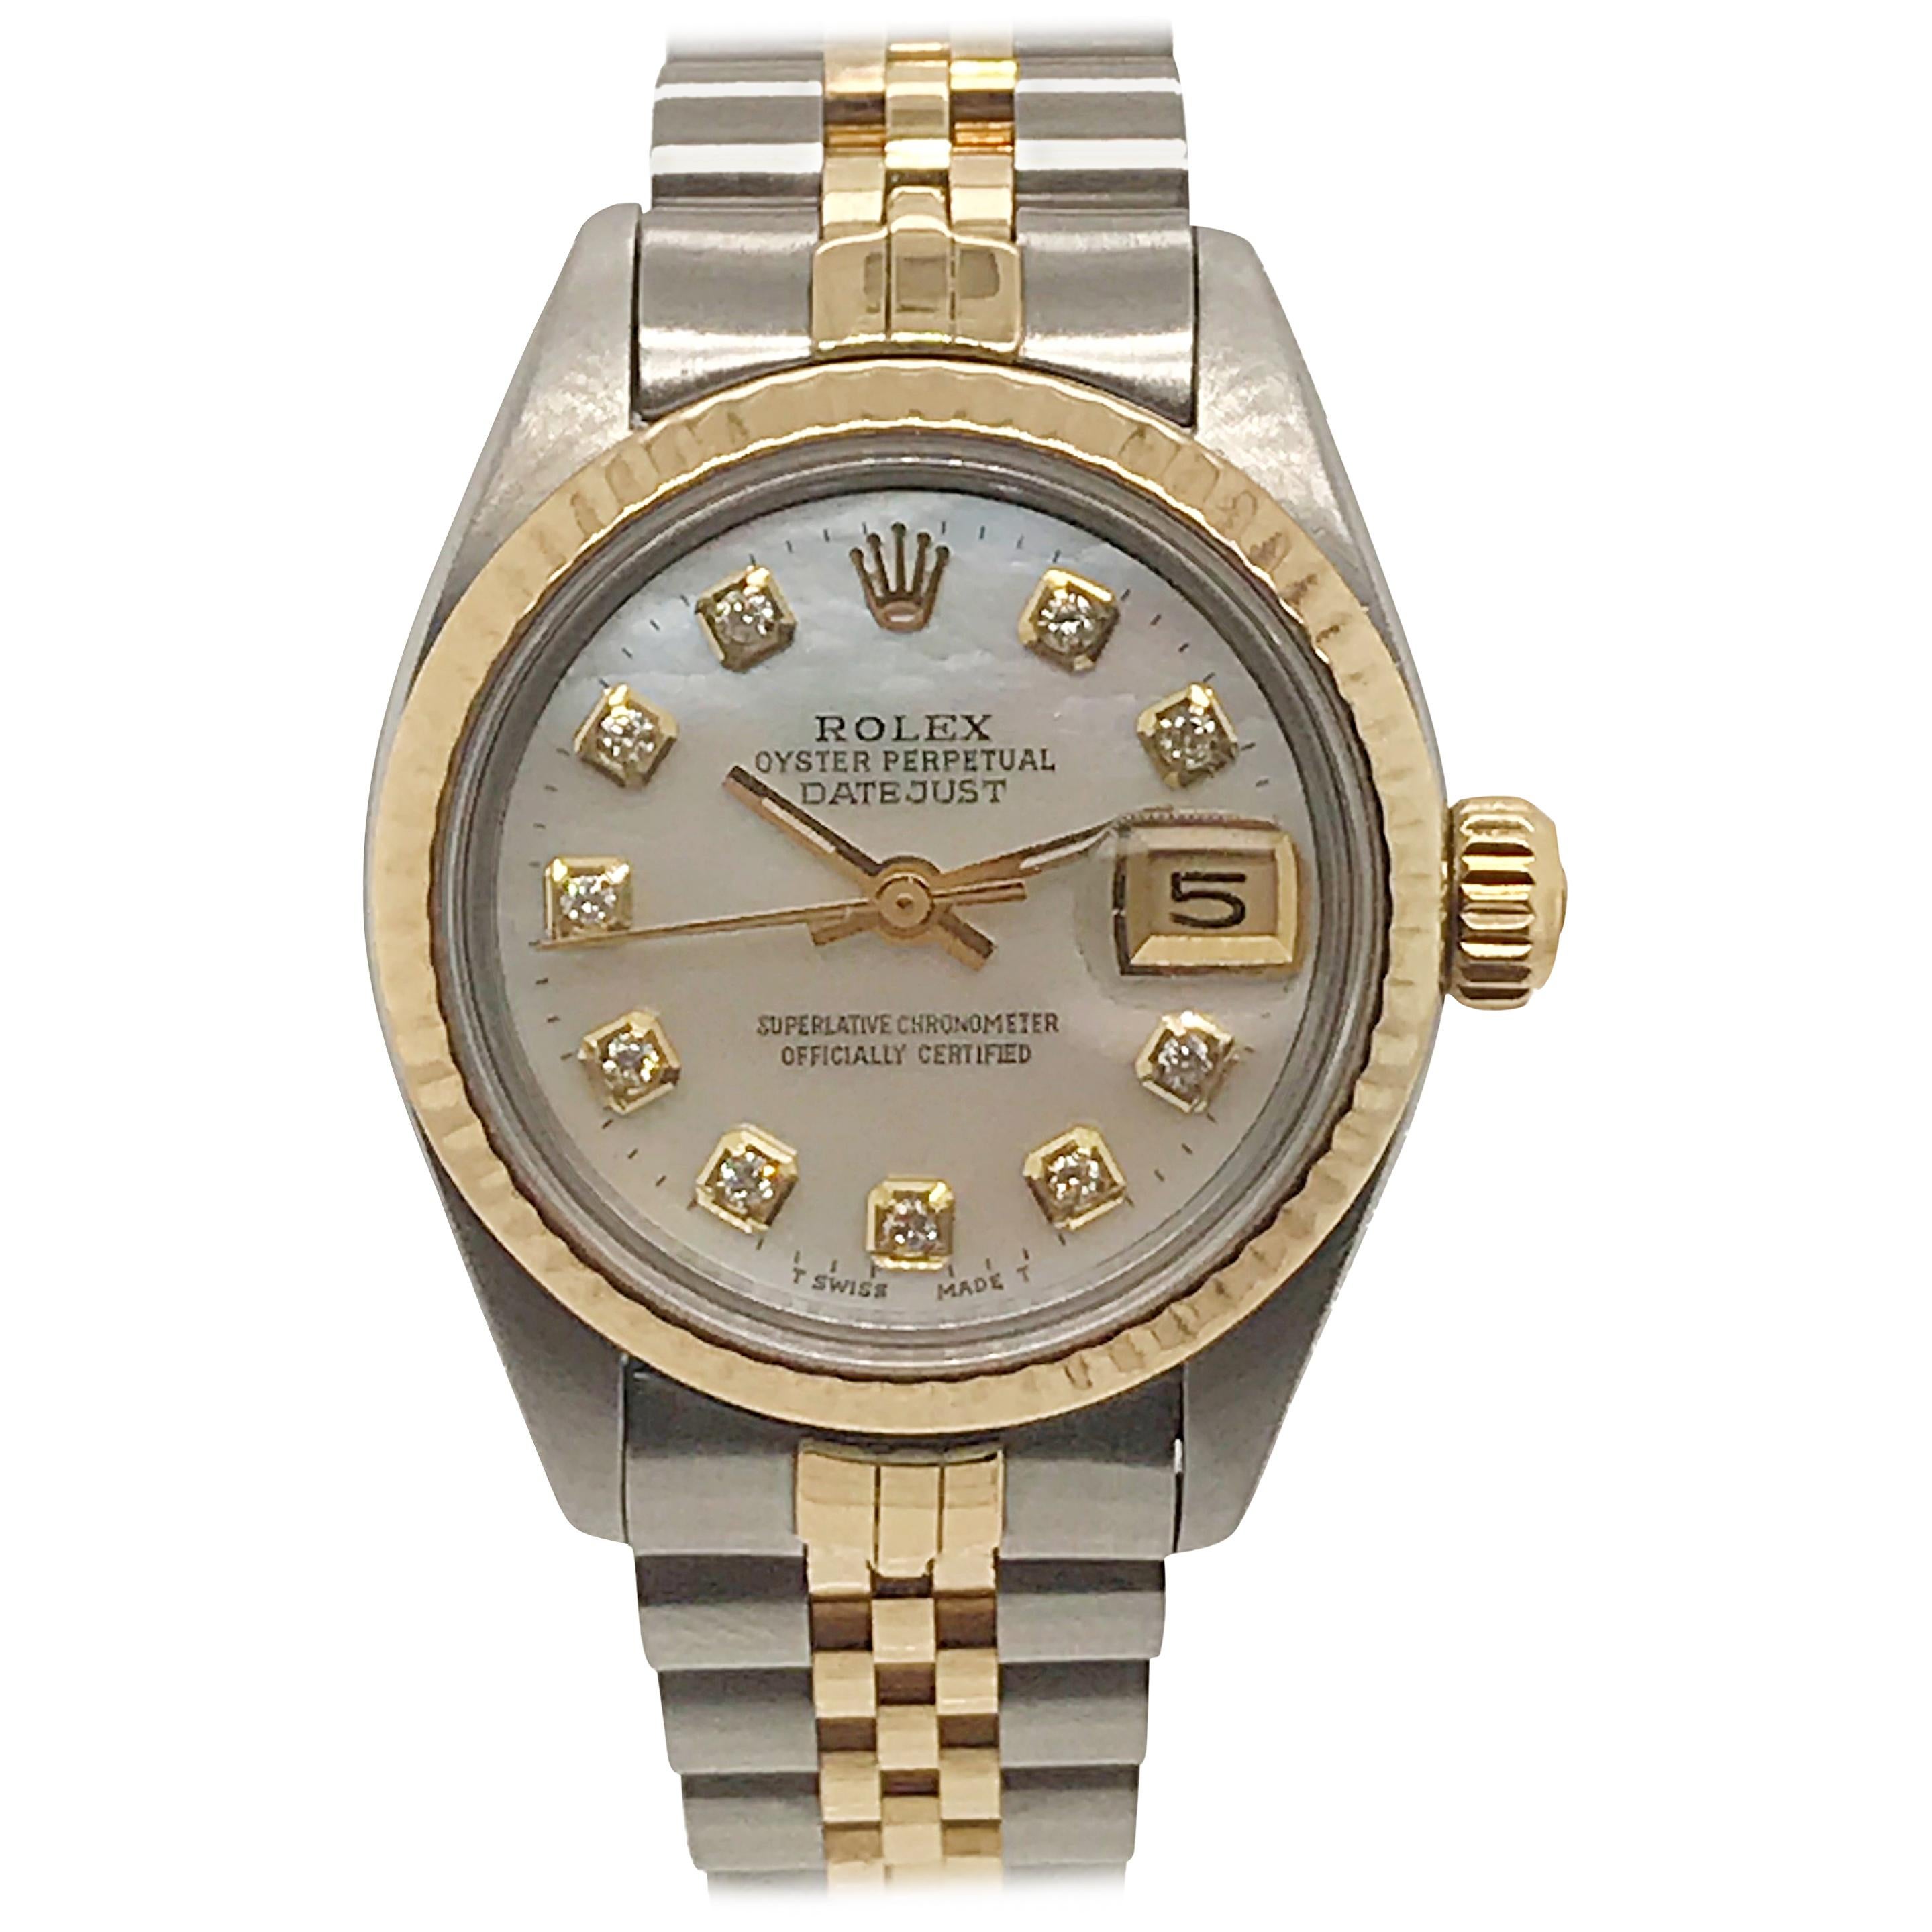 Rolex Ladies yellow gold Stainless Steel Diamond Dial Date wristwatch, c 1983